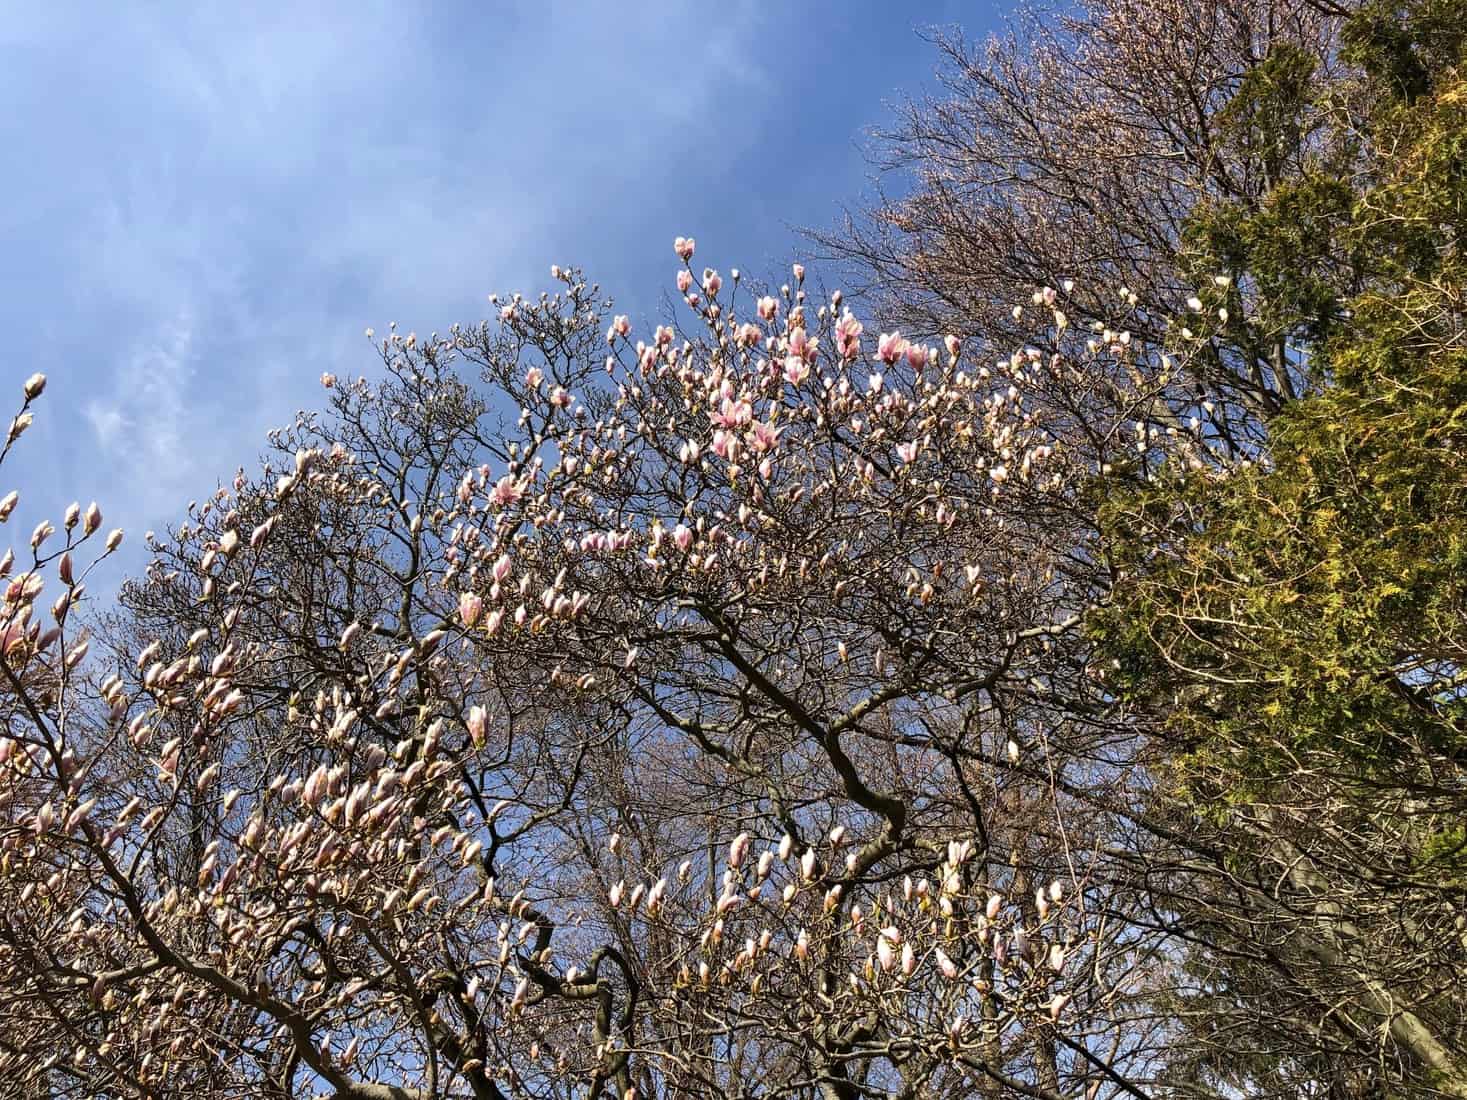 A gusty blue sky, apparently in motion, as the very temporary white with pink flowers, of a magnolia, are set to bloom. All this as a metaphor for Seneca’s call to seize what flees before it (our time) is gone.